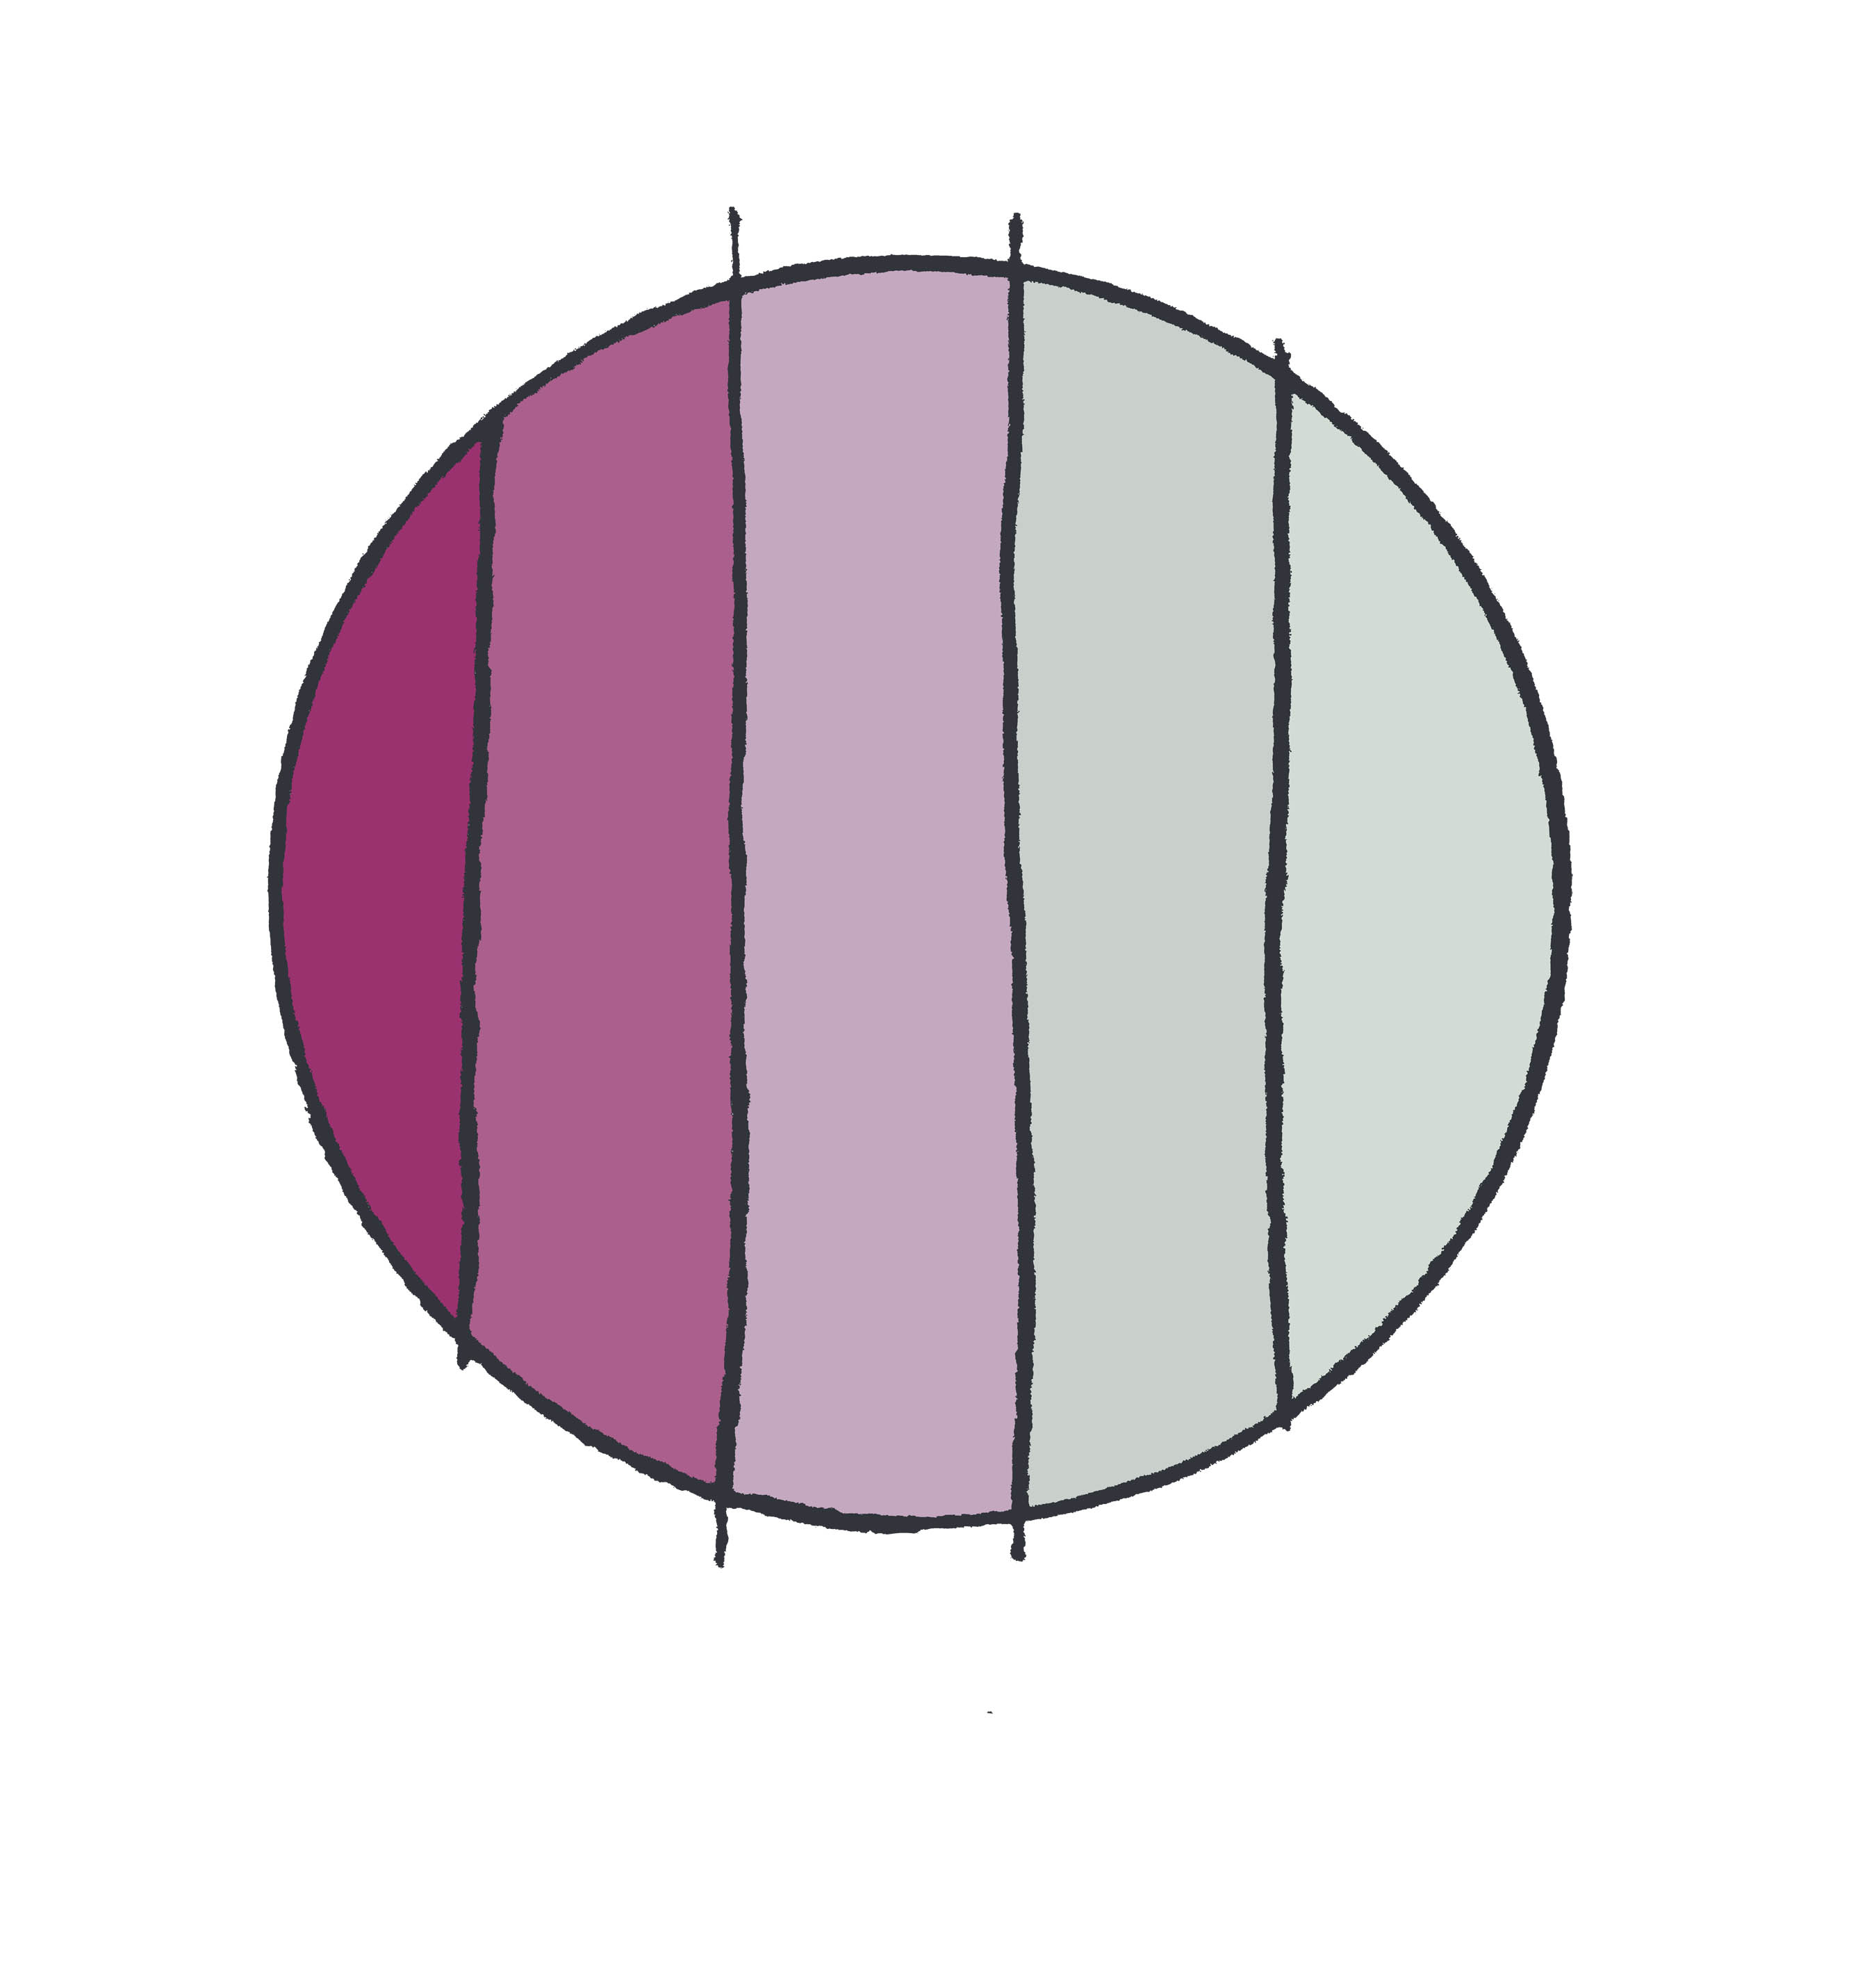 art every day number 399 / colour circle  / purple greys 41 94